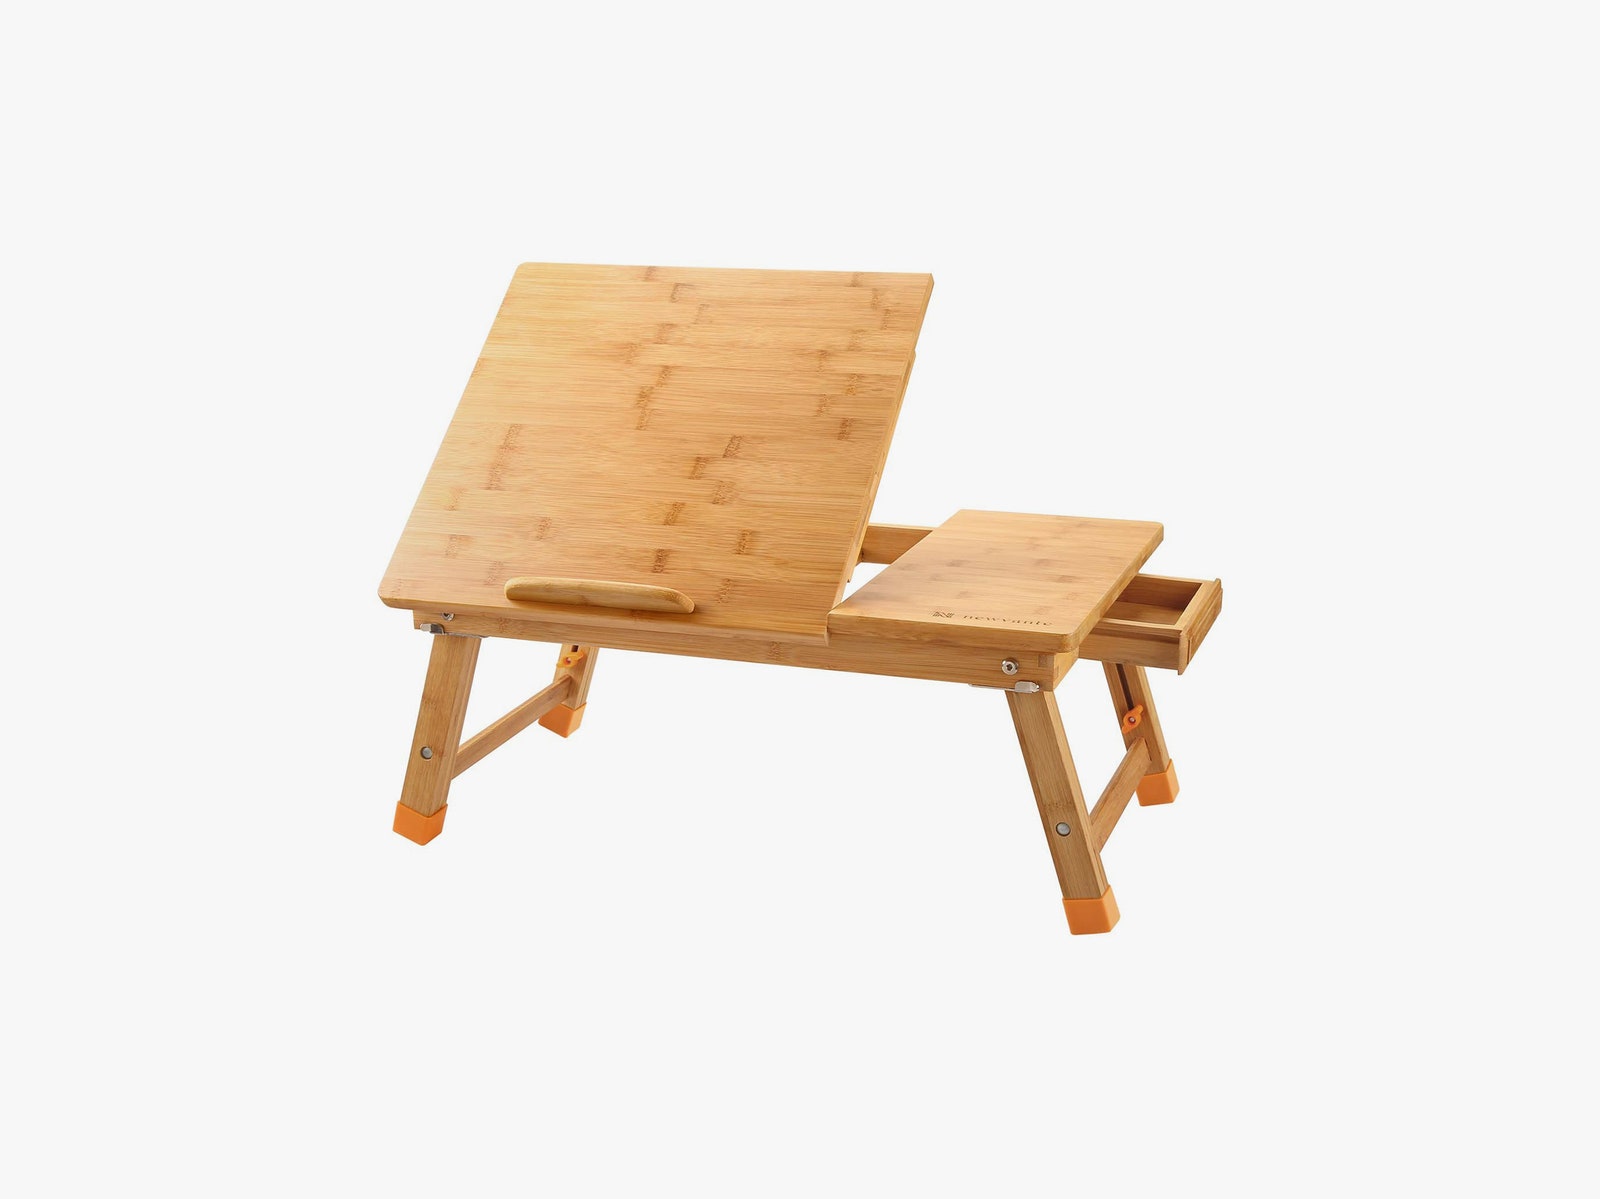 Image may contain Wood Plywood Furniture Tabletop and Table